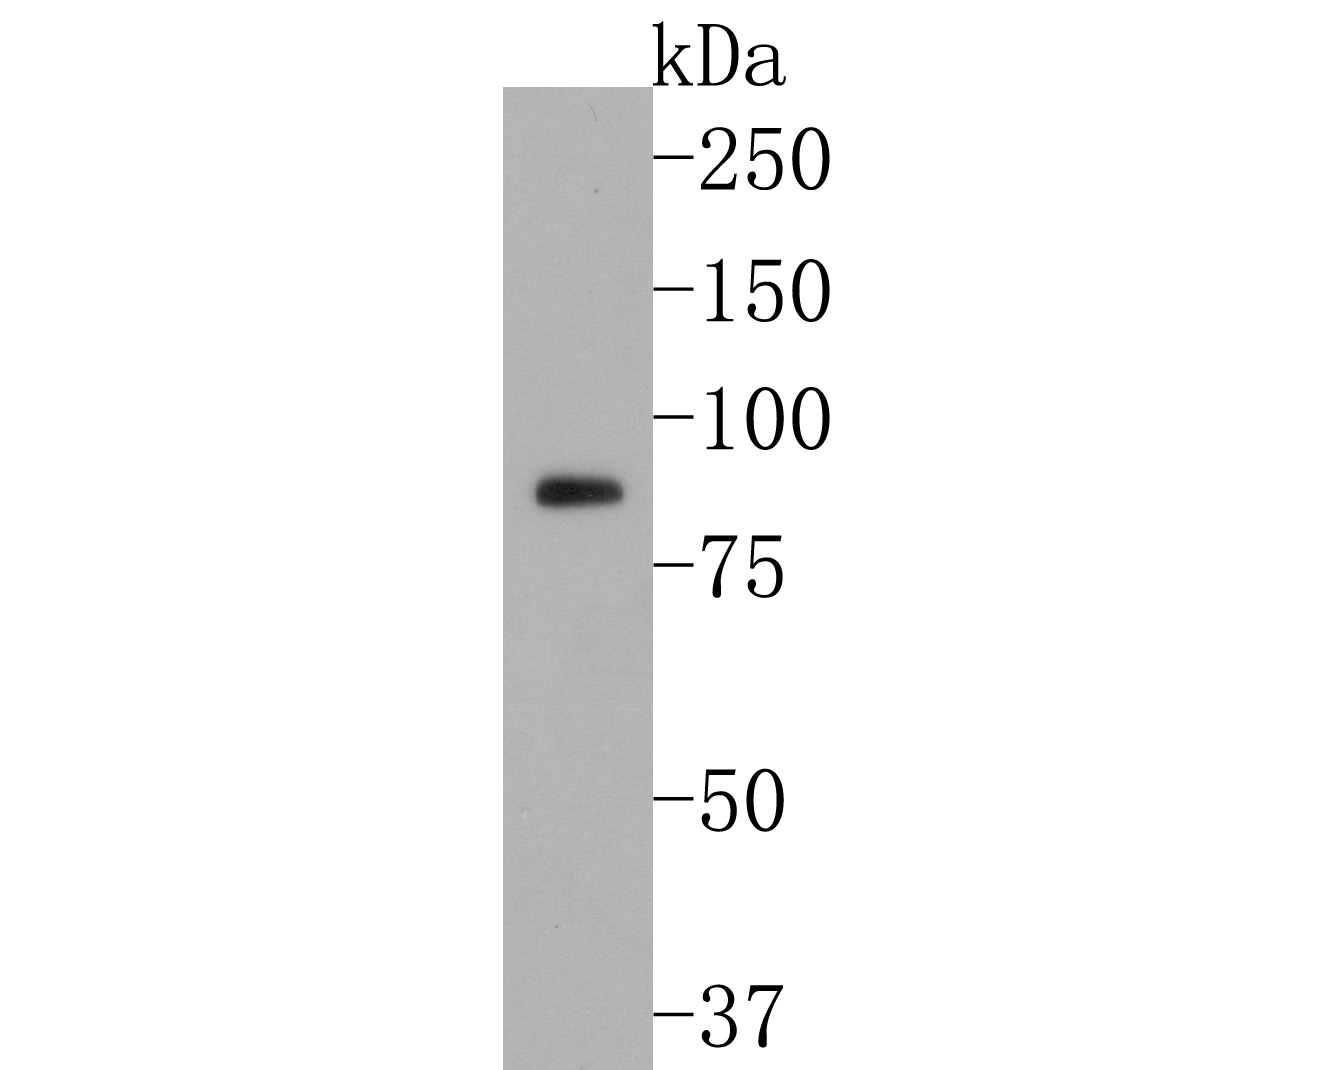 Western blot analysis of Phospho-B Raf(T401) on PC-12 cell lysates. Proteins were transferred to a PVDF membrane and blocked with 5% BSA in PBS for 1 hour at room temperature. The primary antibody (ET1701-20, 1/500) was used in 5% BSA at room temperature for 2 hours. Goat Anti-Rabbit IgG - HRP Secondary Antibody (HA1001) at 1:200,000 dilution was used for 1 hour at room temperature.